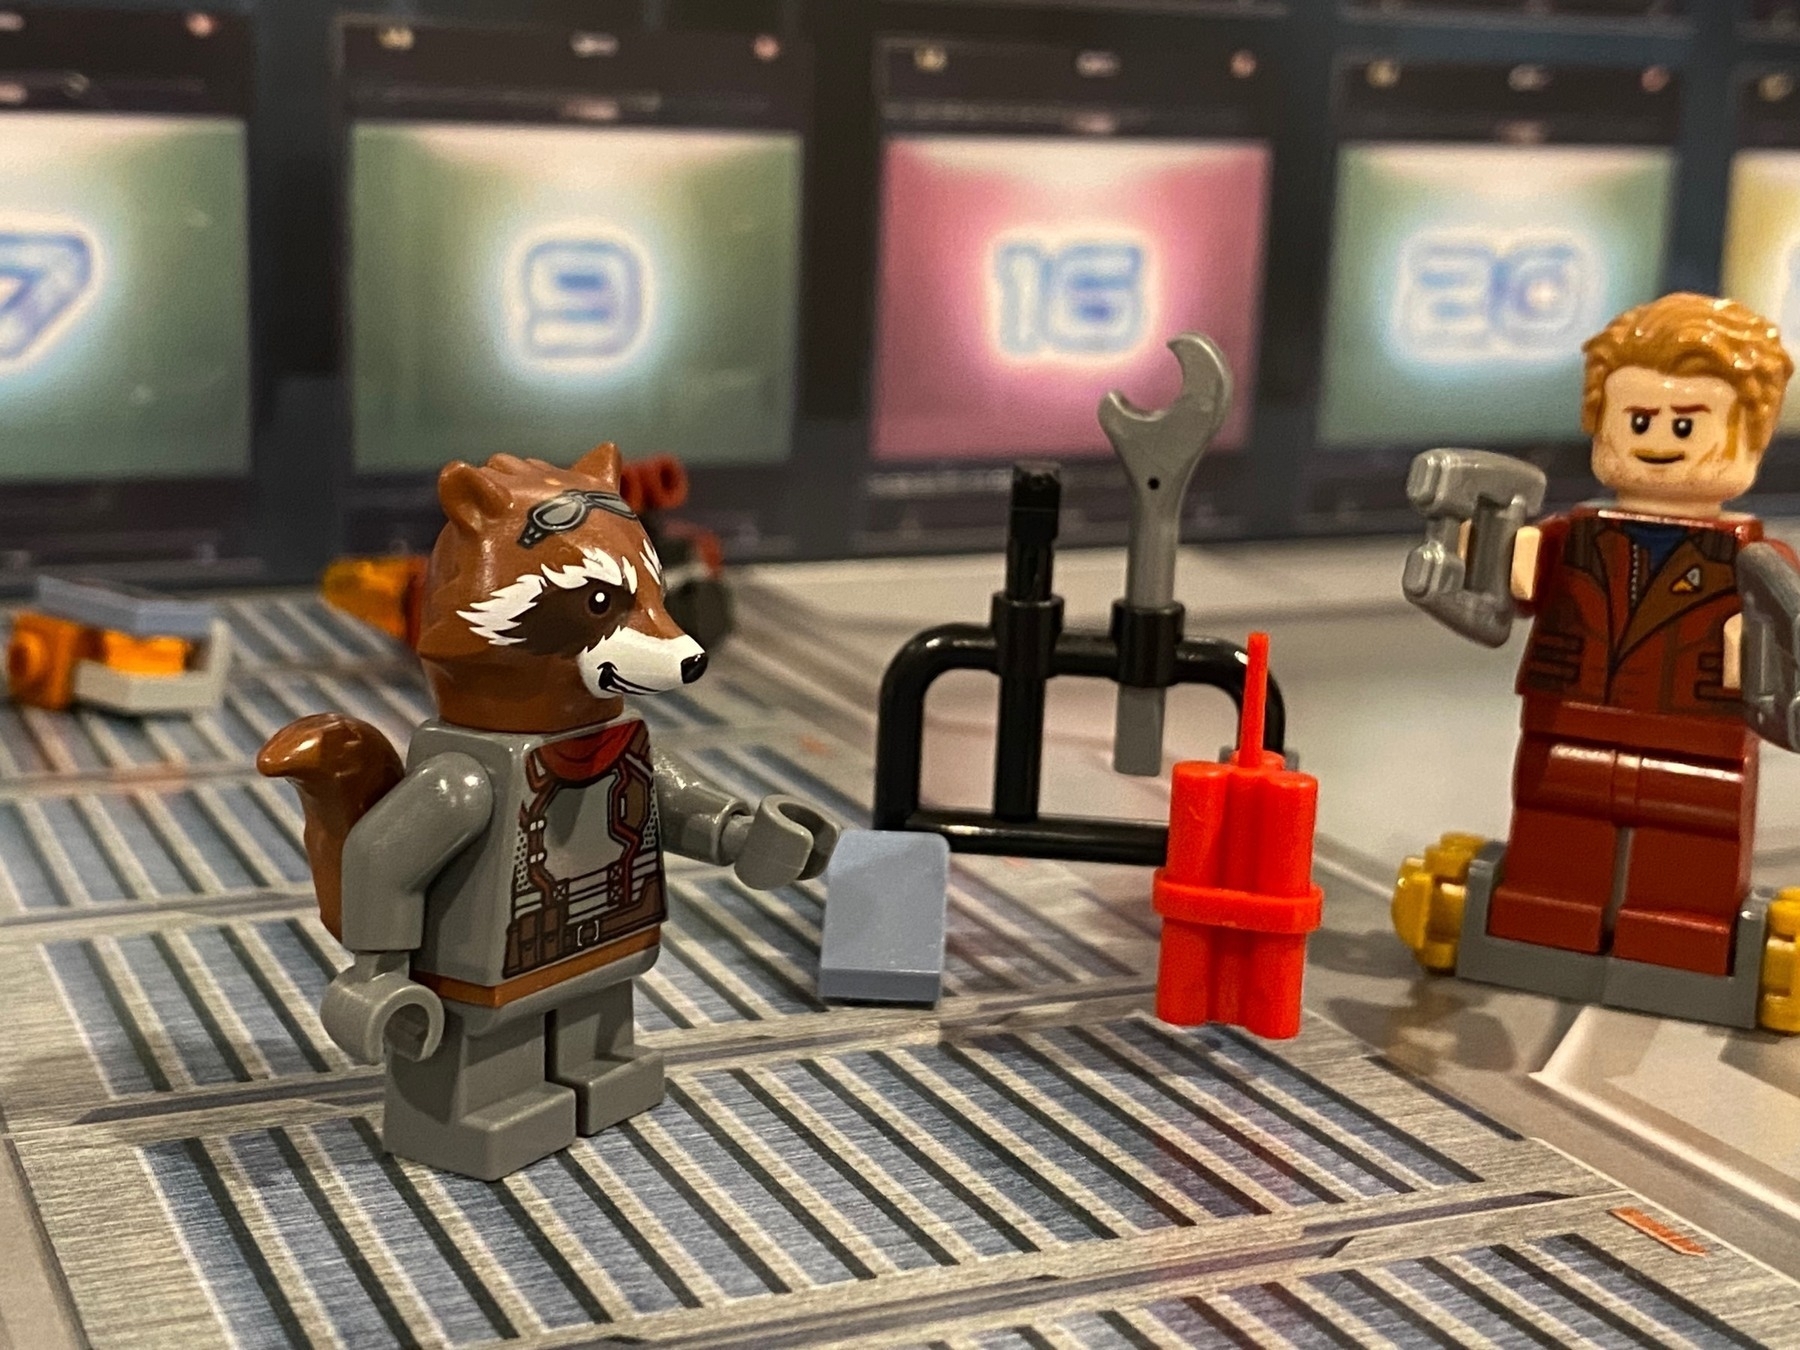 Lego Rocket Racoon standing next to the Lego tool rack from yesterday